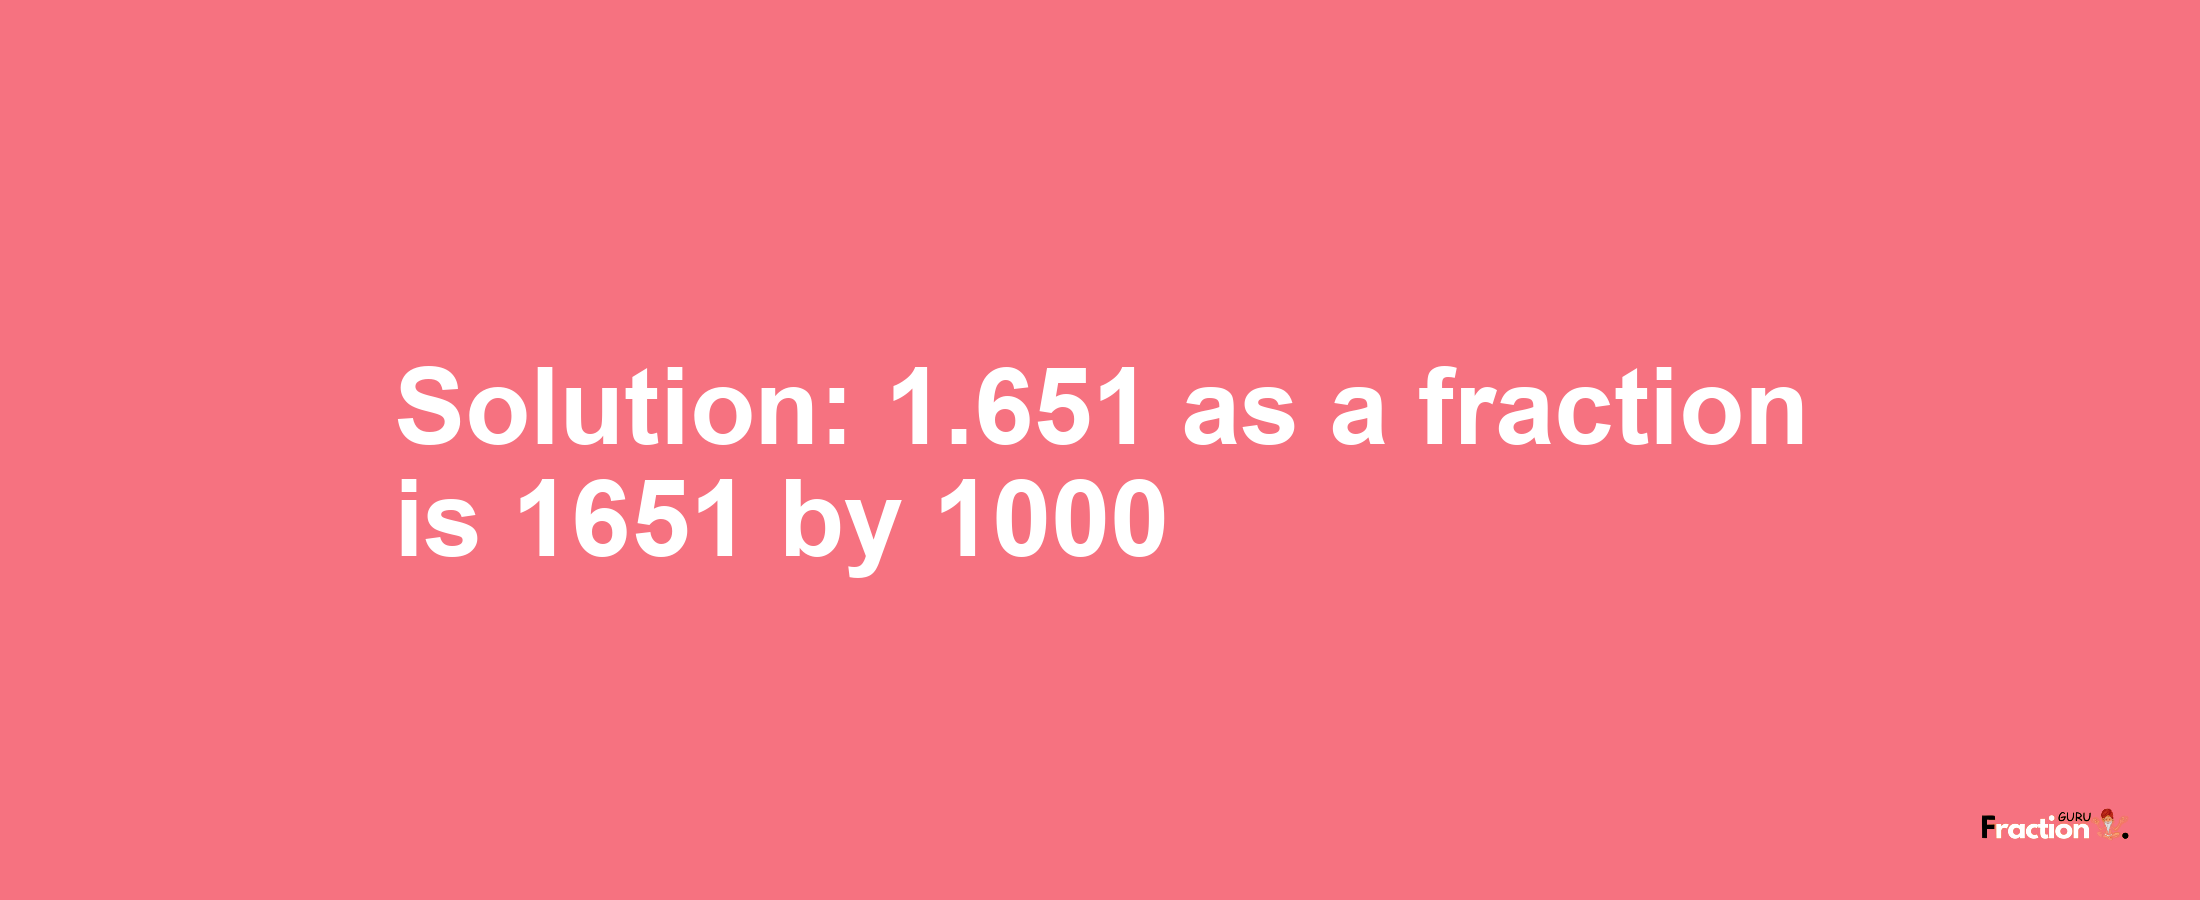 Solution:1.651 as a fraction is 1651/1000